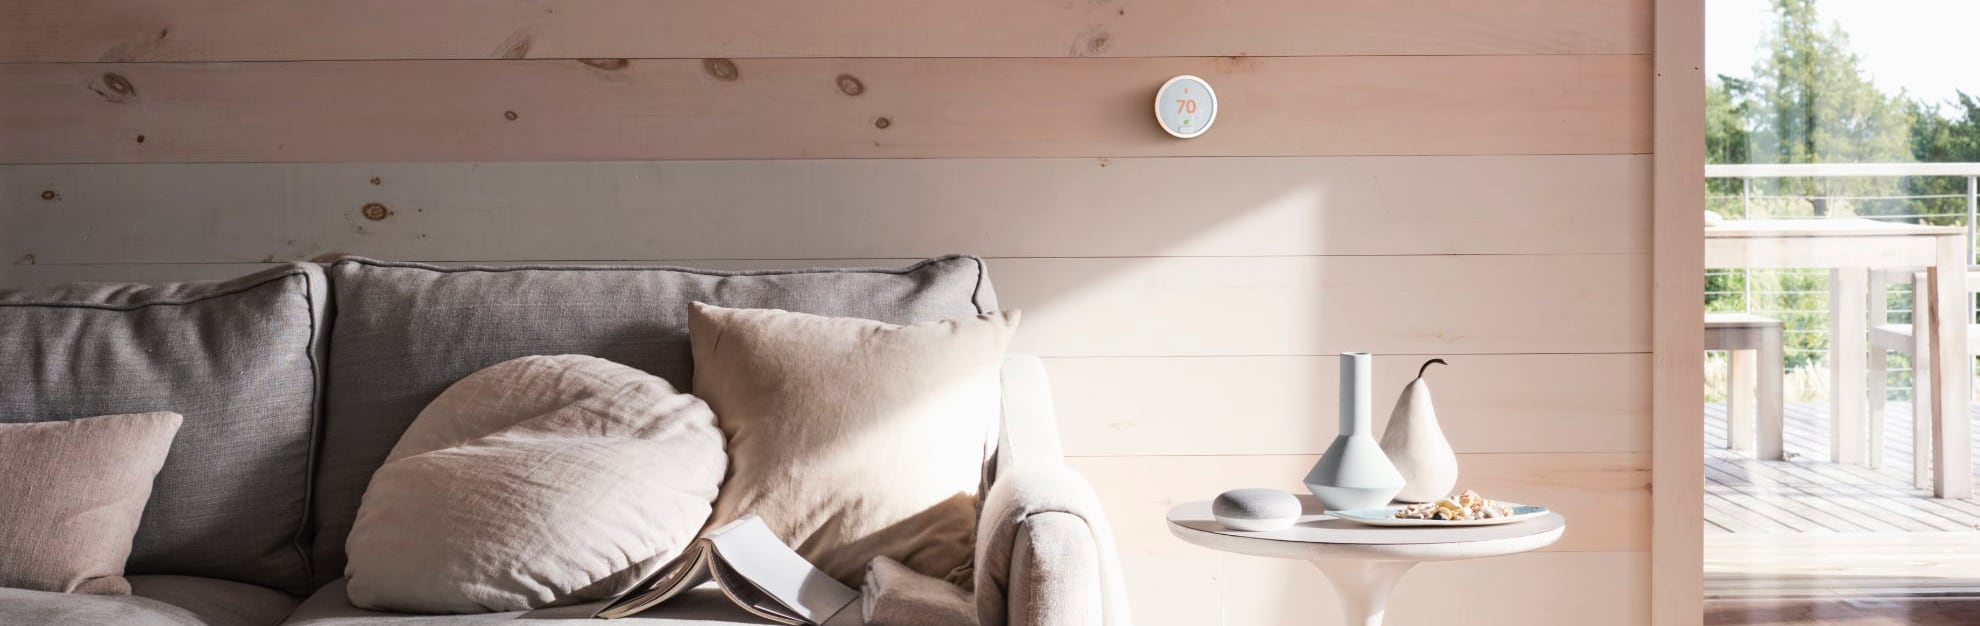 Vivint Home Automation in Napa